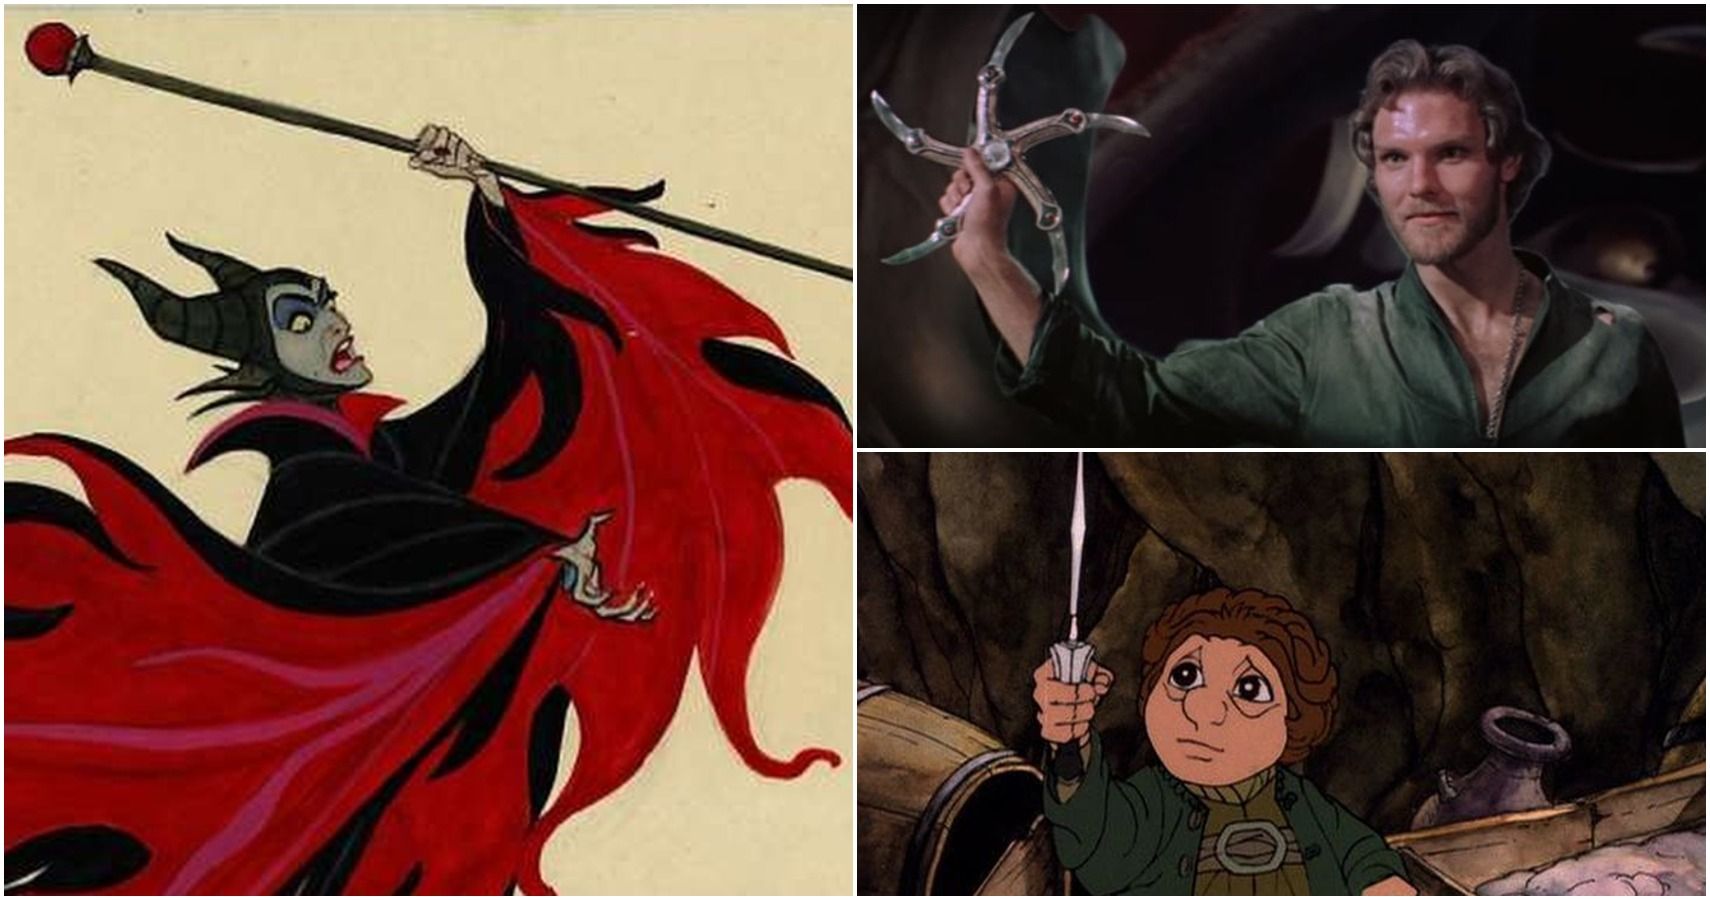 10 Greatest Fantasy Weapons in Film Ranked